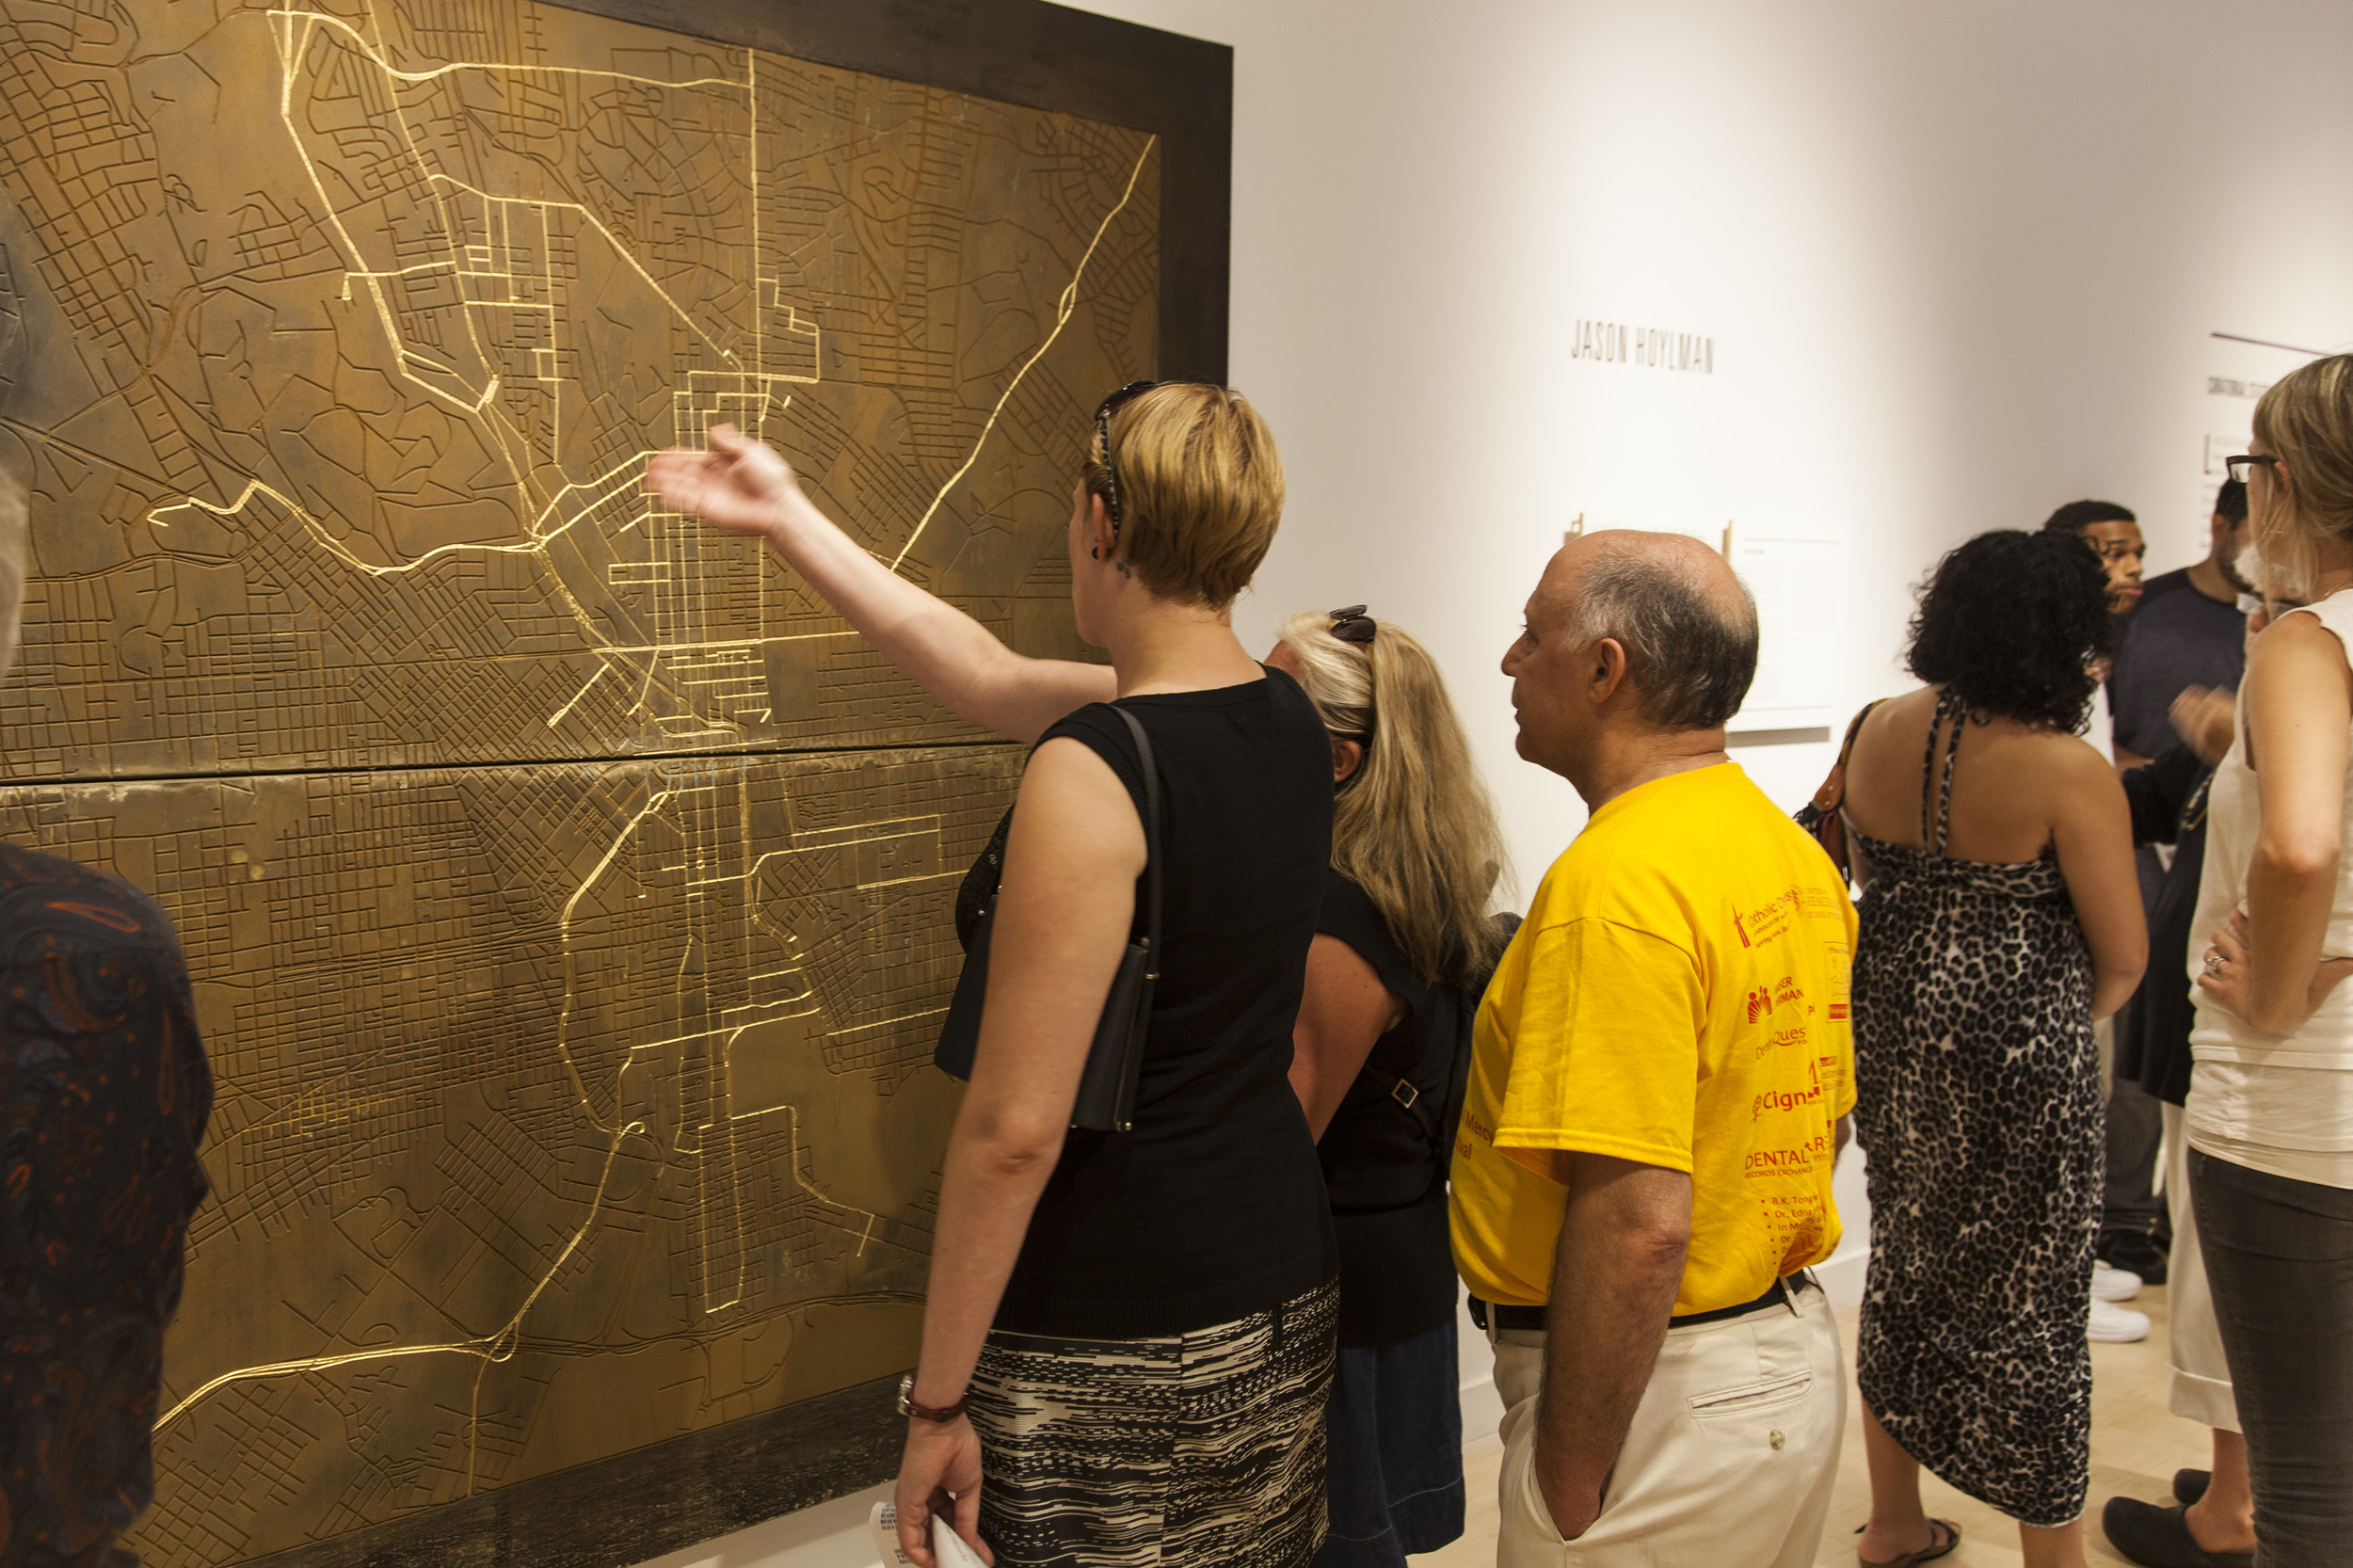   Visitors examining Hoylman's map of Station North and greater Baltimore.  